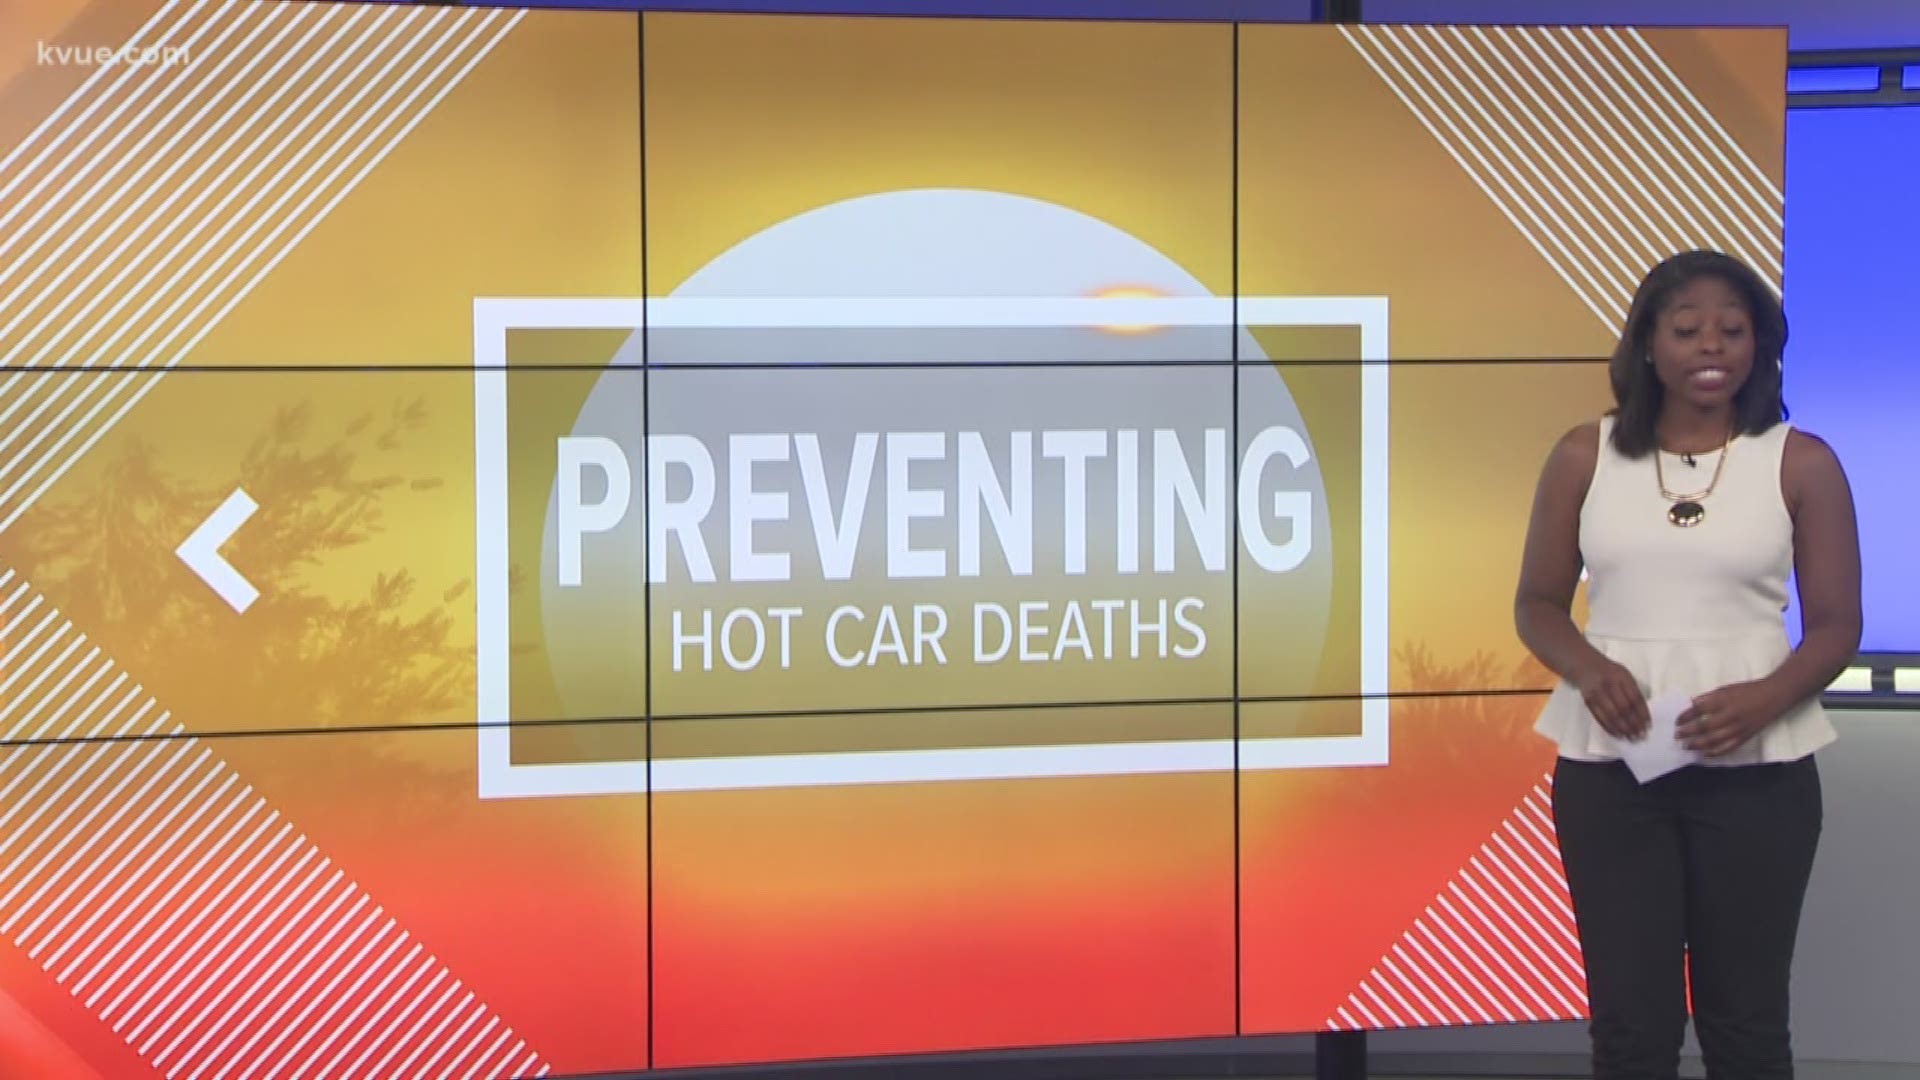 According to a safety advocacy group, more children die in hot cars in Texas than anywhere else in Texas.